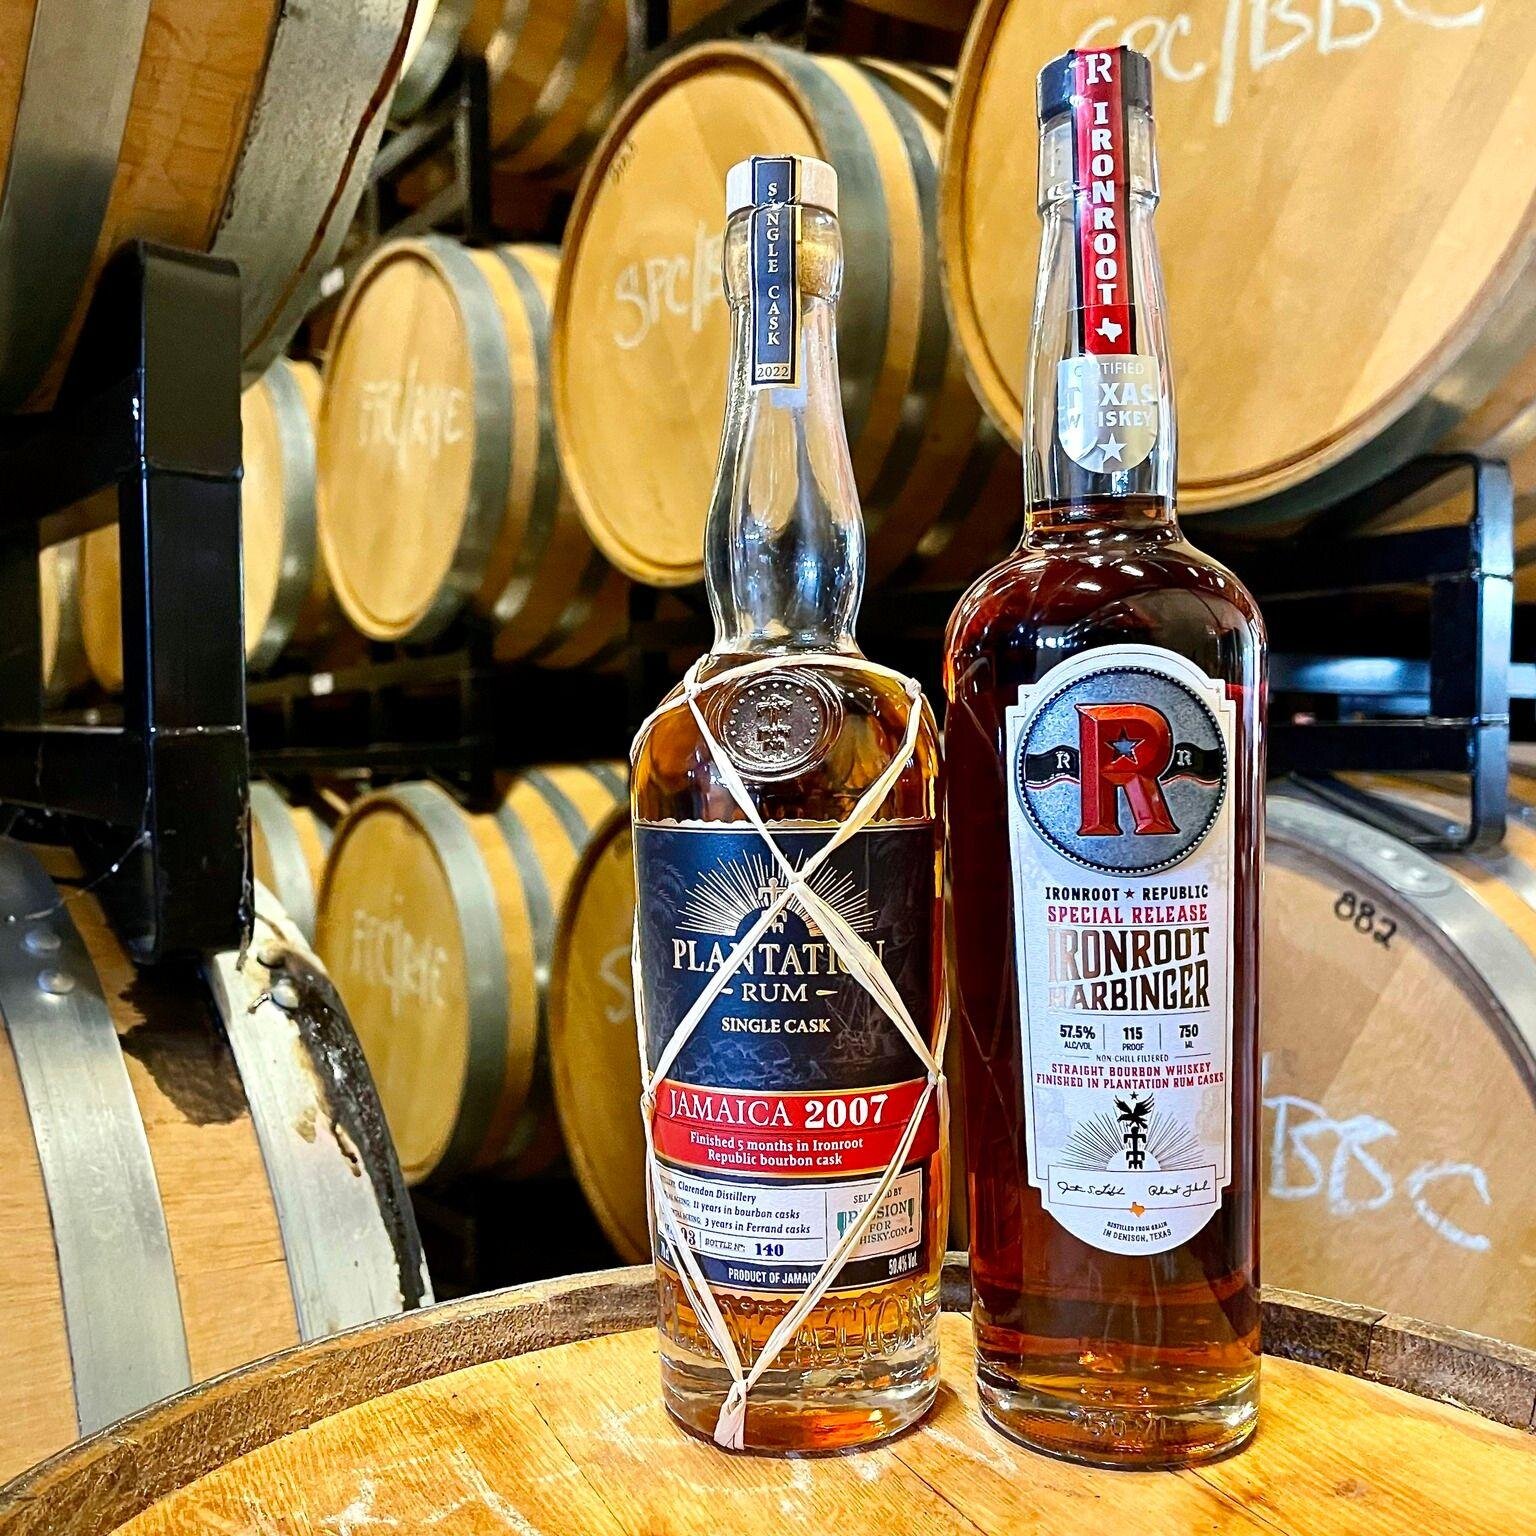 Robert is joining our podcasting pals @smokinntoastin today at 4pmd, alongside @ferrandcognac regional manager Greg Doxakis, to chat about our recent collaboration with @plantation.rum !
They&rsquo;ll be sipping our sensational Harbinger finished in 